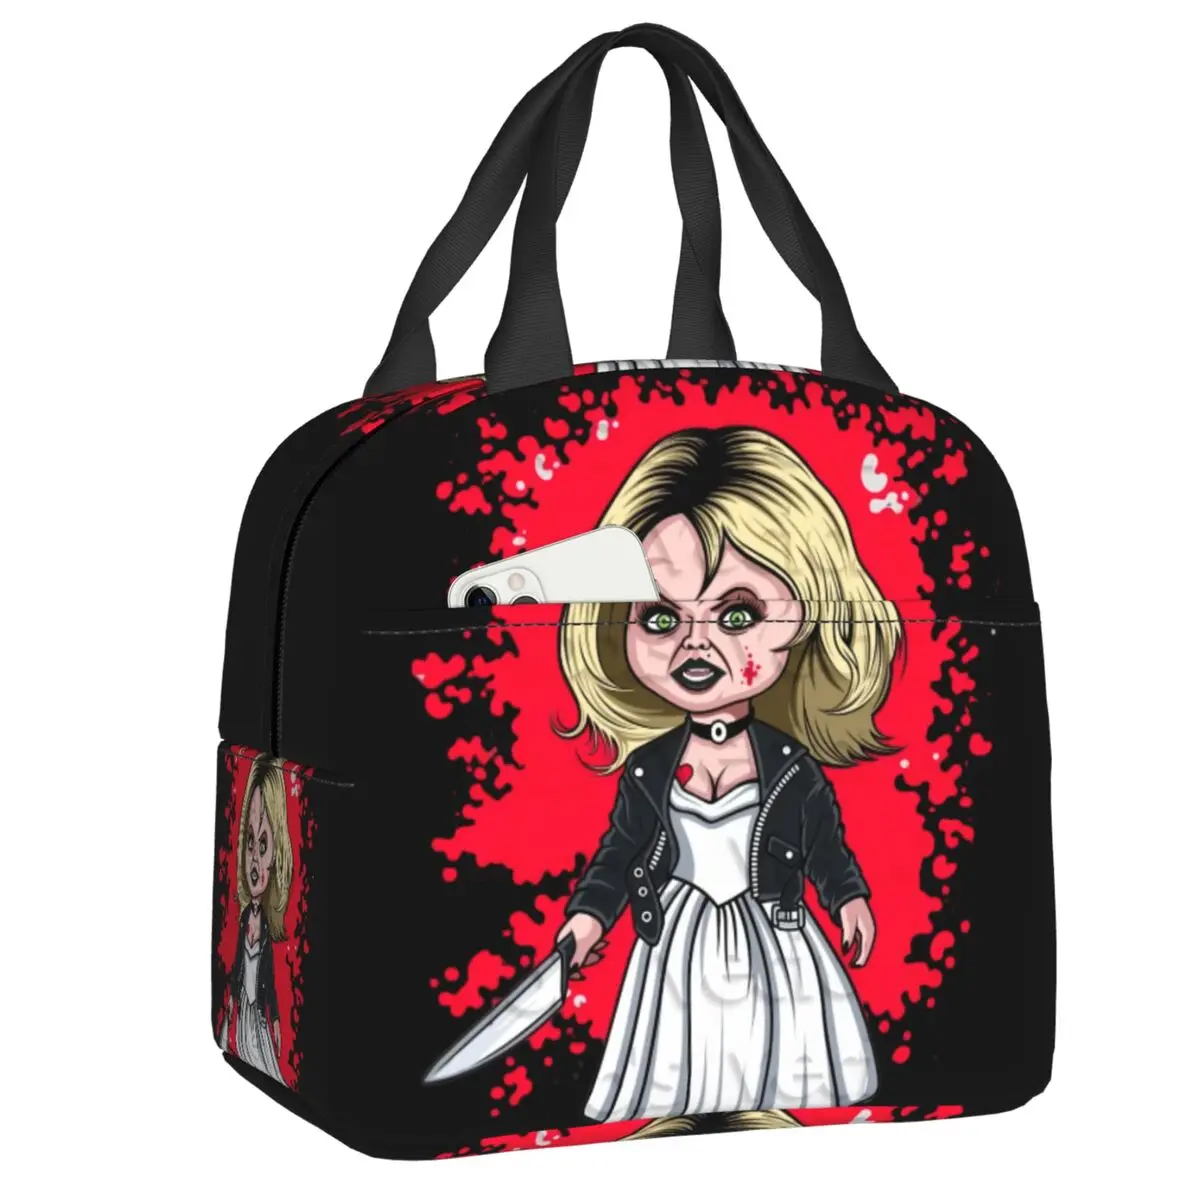 

Bride Of Chucky Lunch Box for Women Leakproof Scary Tiffany Cooler Thermal Insulated Lunch Bag Office Work Picnic Food Bags